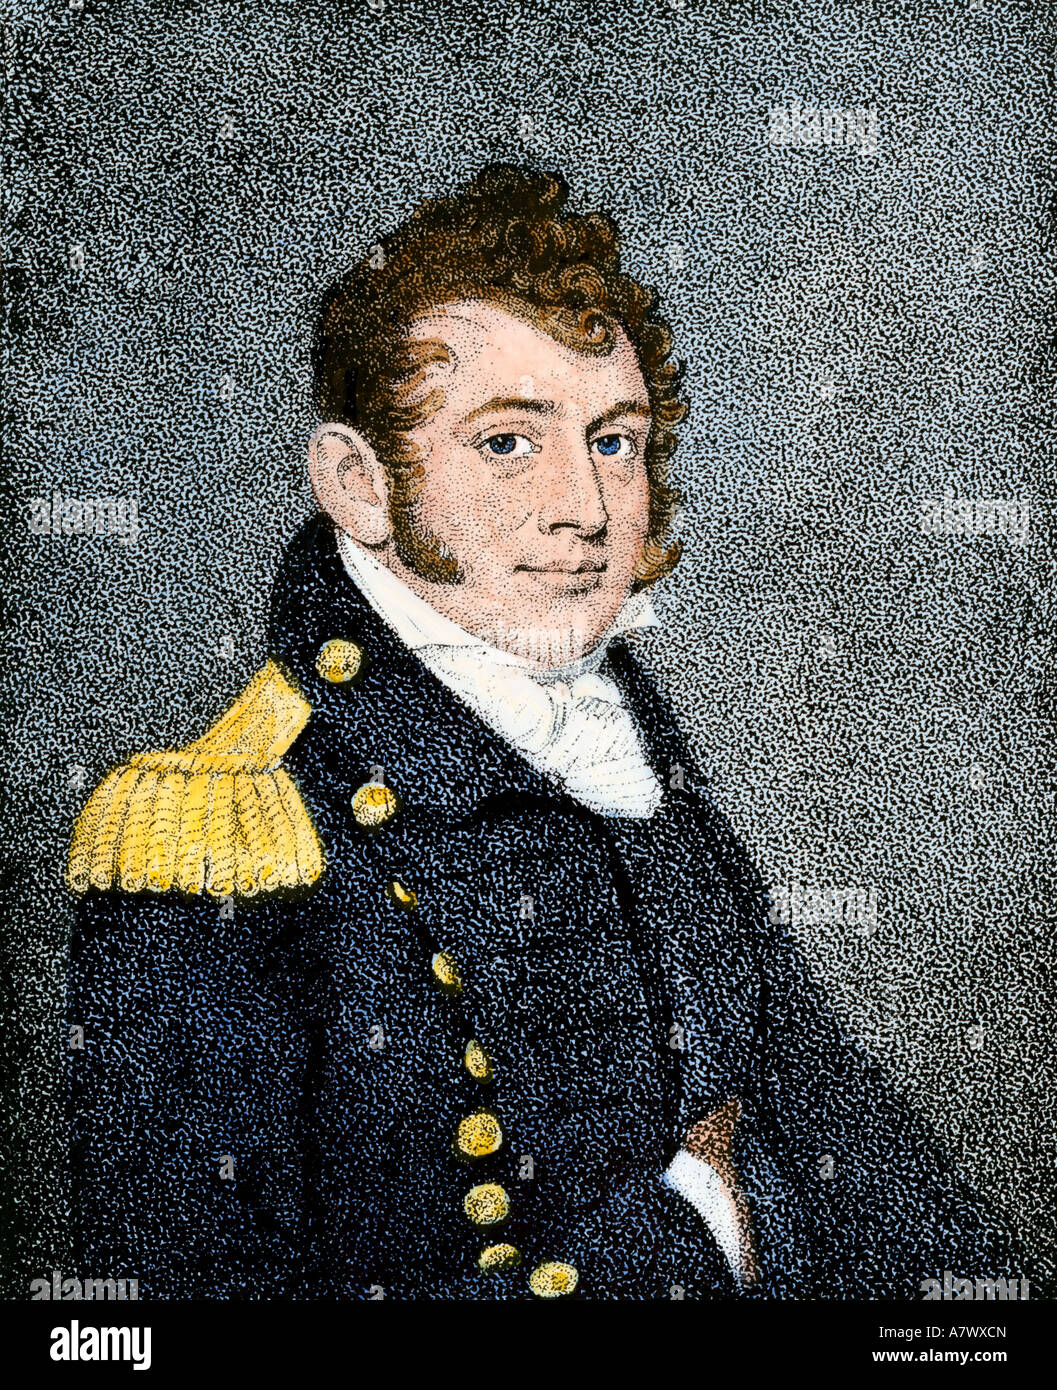 Oliver Hazard Perry portrait. Hand-colored engraving Stock Photo